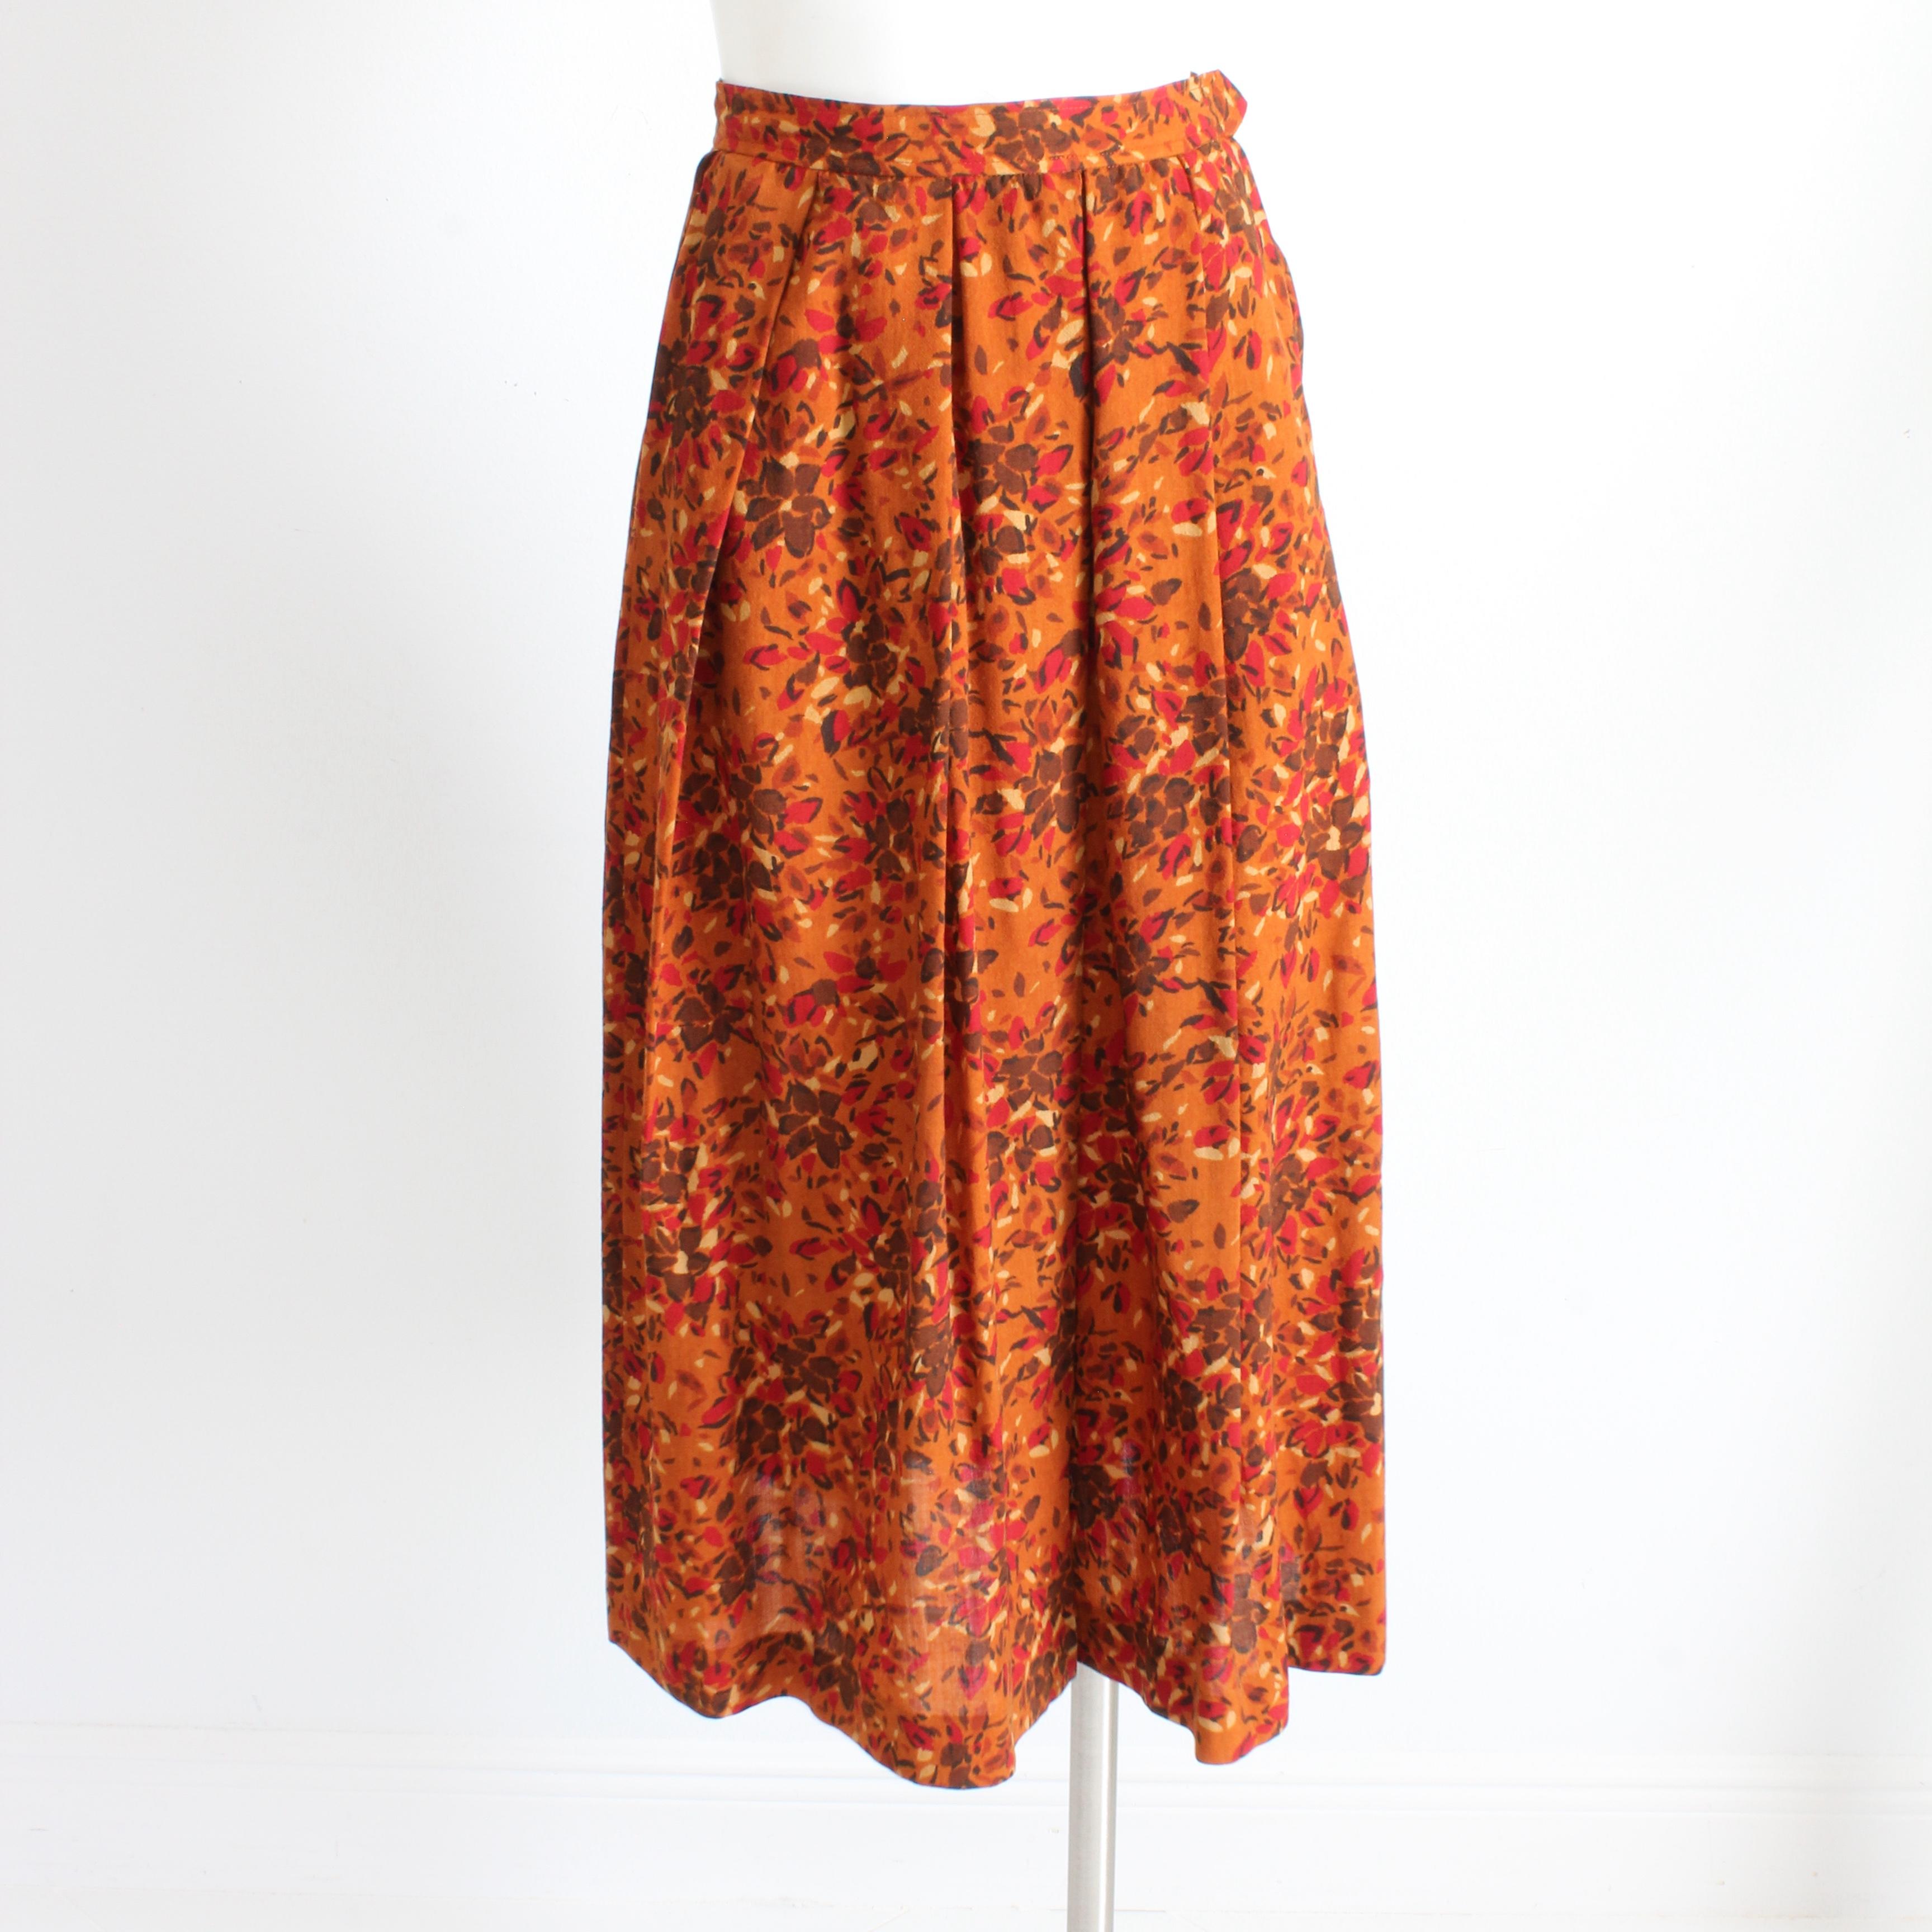 Authentic, preowned, vintage skirt by Yves Saint Laurent Rive Gauche, most likely made in the early 1980s.  Made from what we believe is a lightweight wool or wool blend fabric (no content label), it features an abstract graphic floral print in